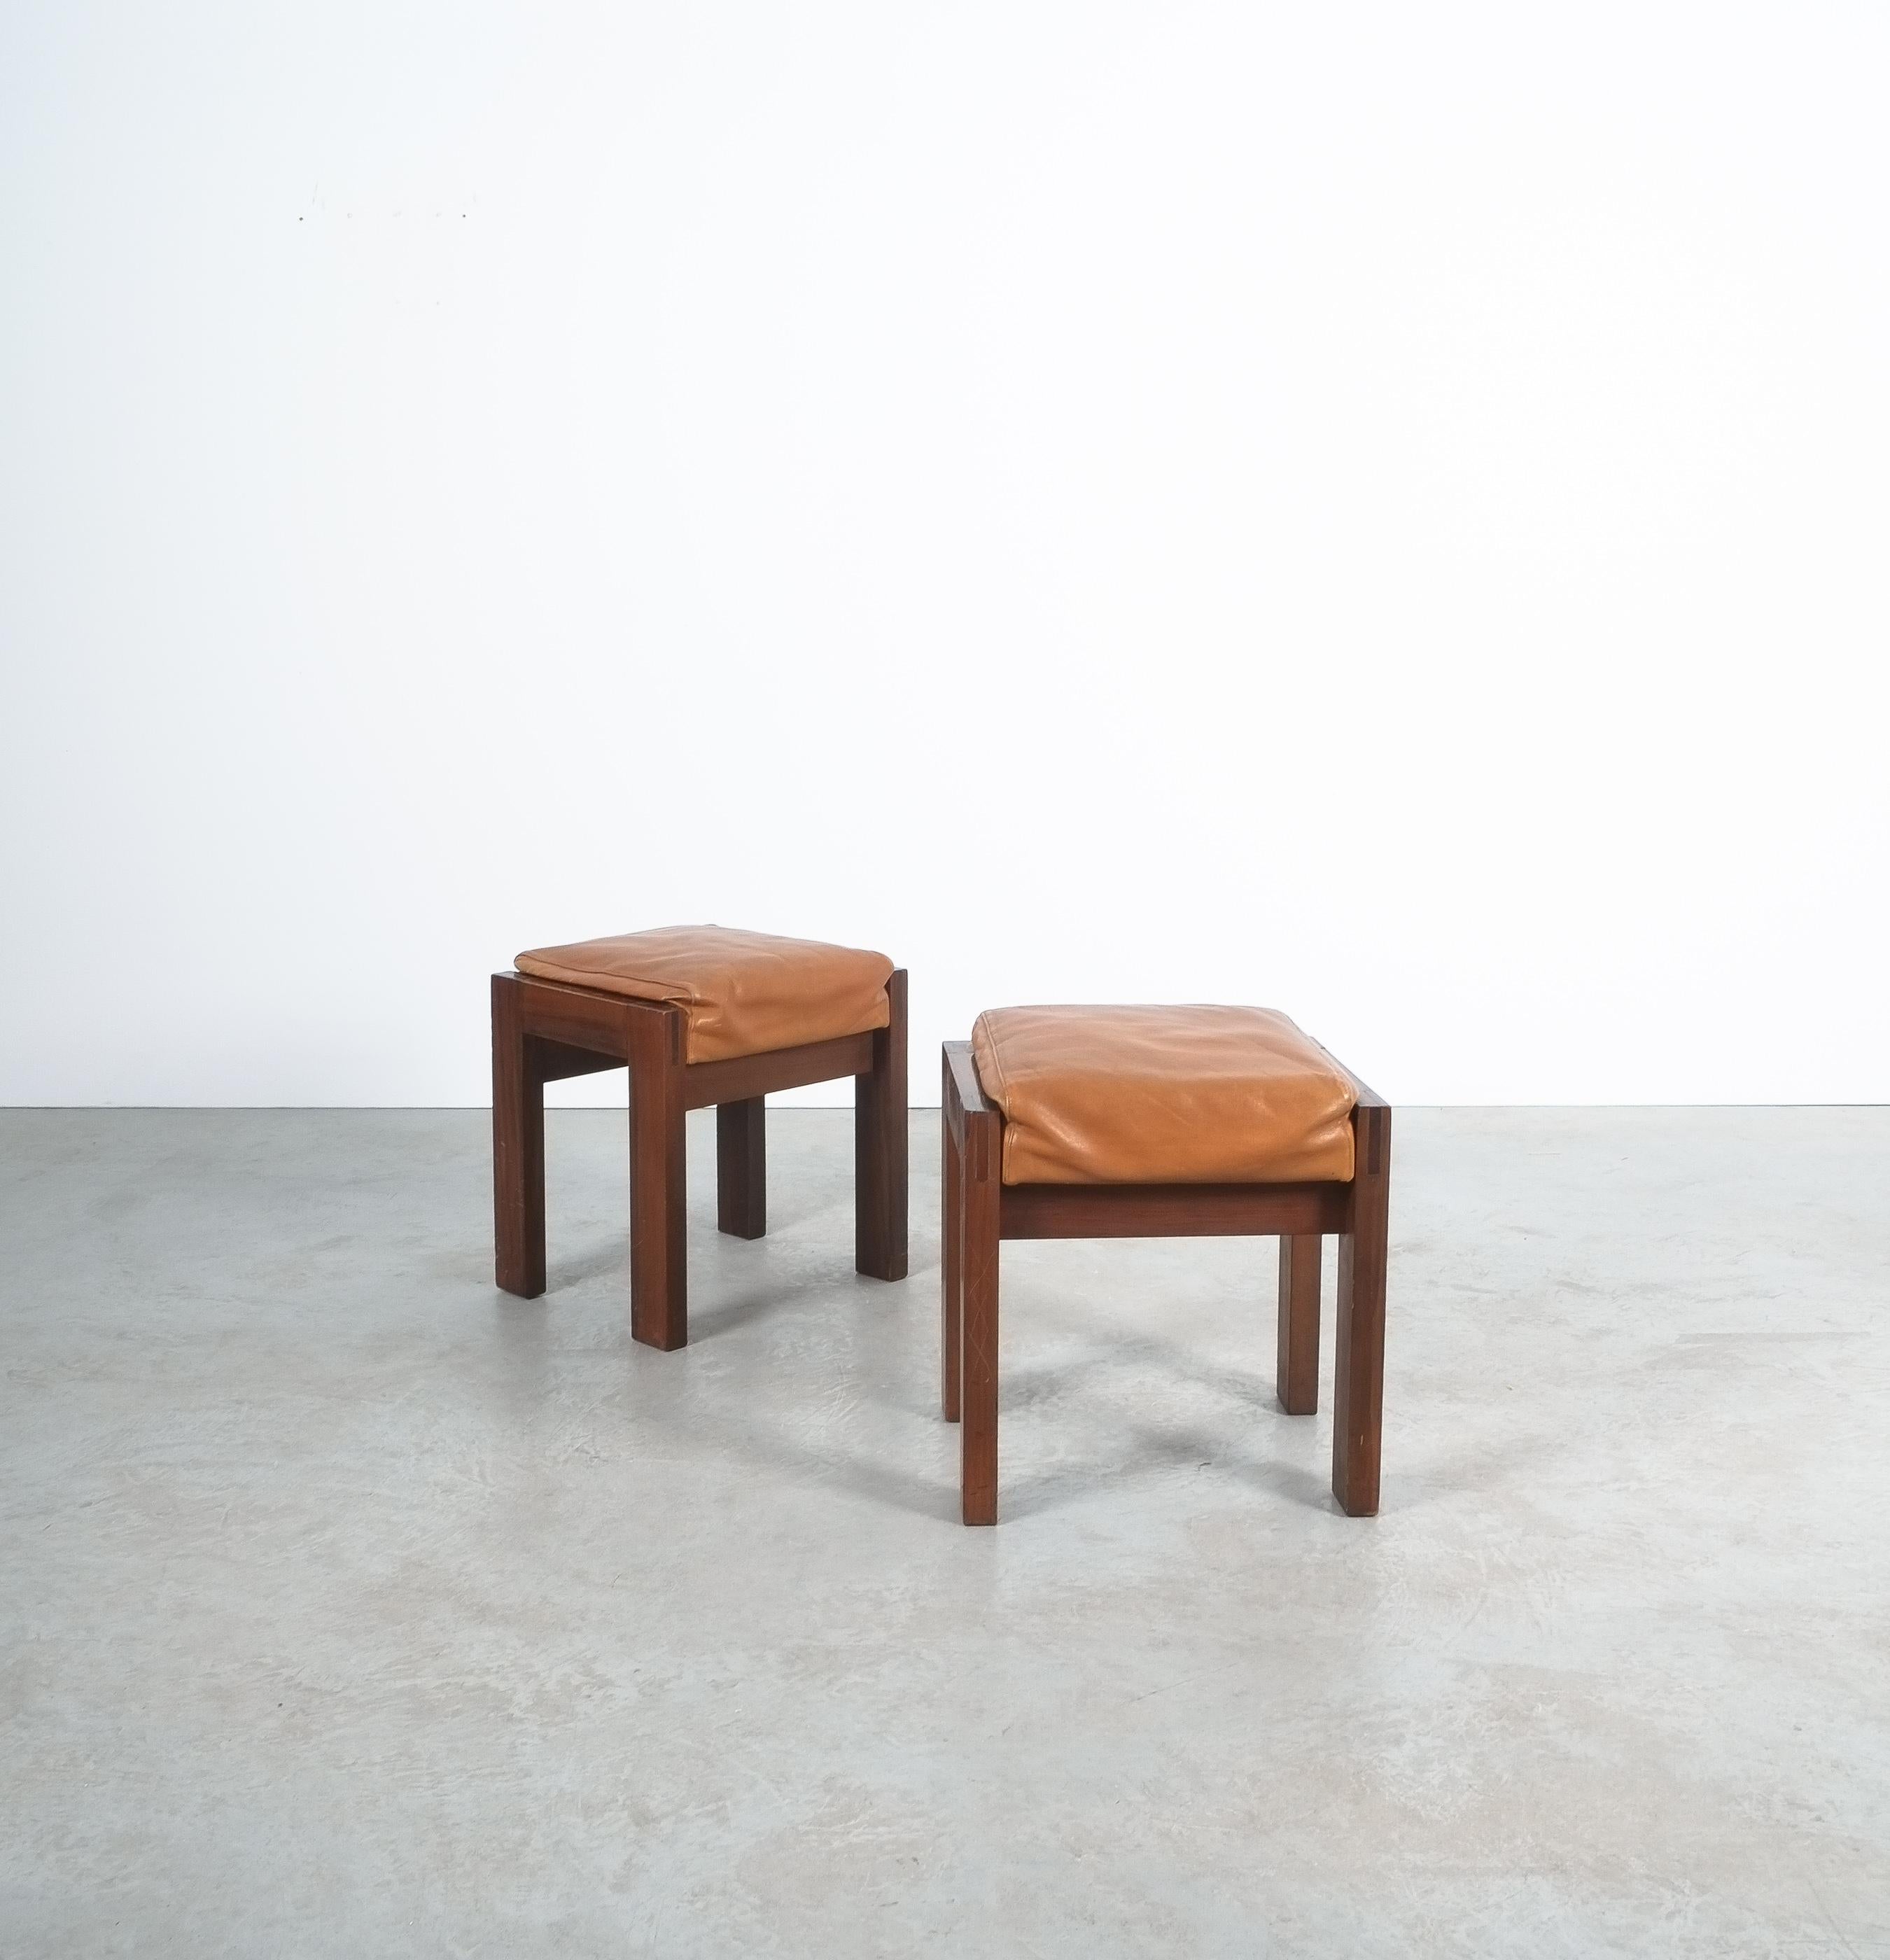 Maple and Leather Midcentury Wood Stools, Italy, 1950 For Sale 4